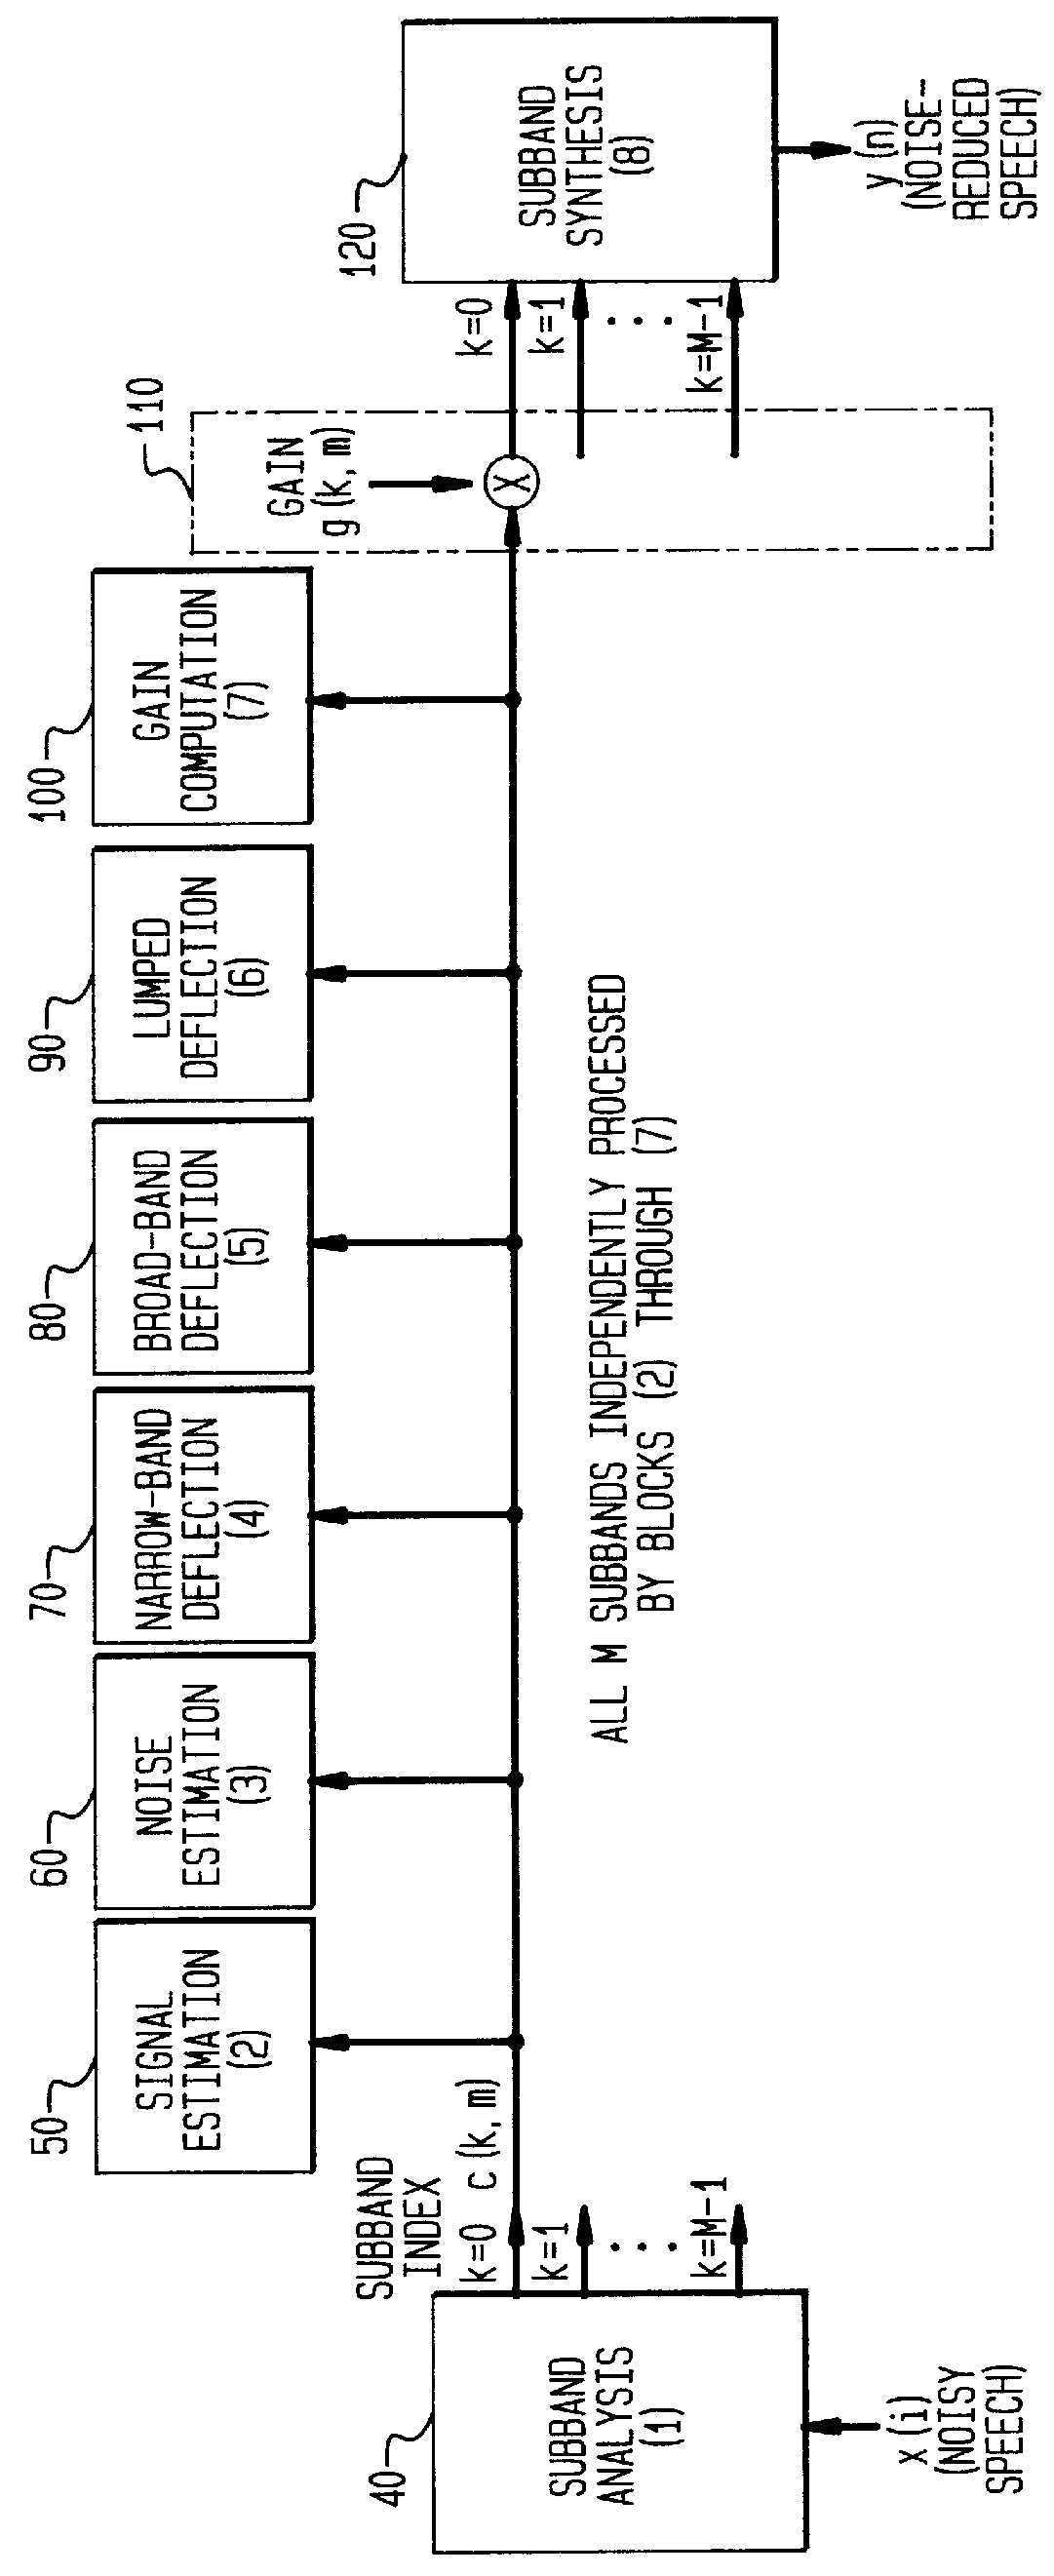 Method and apparatus for reducing noise in speech and audio signals